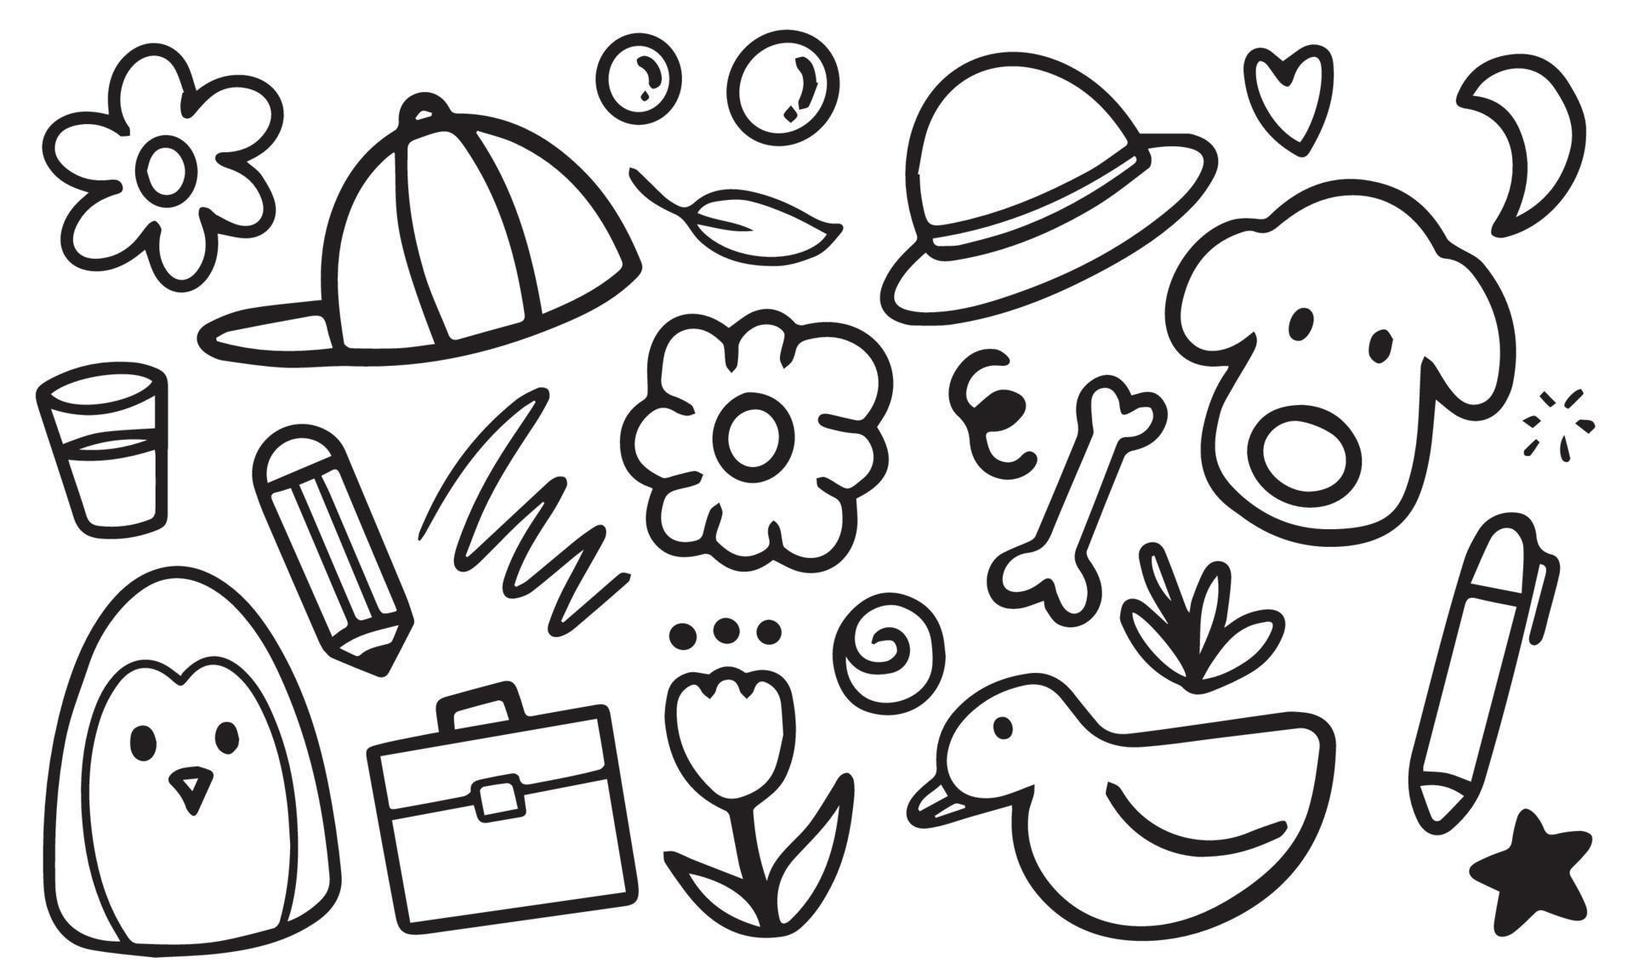 Set of doodle hand drawn. Elements of star, heart, cloud, sun, chicken, flower, spring etc. vector